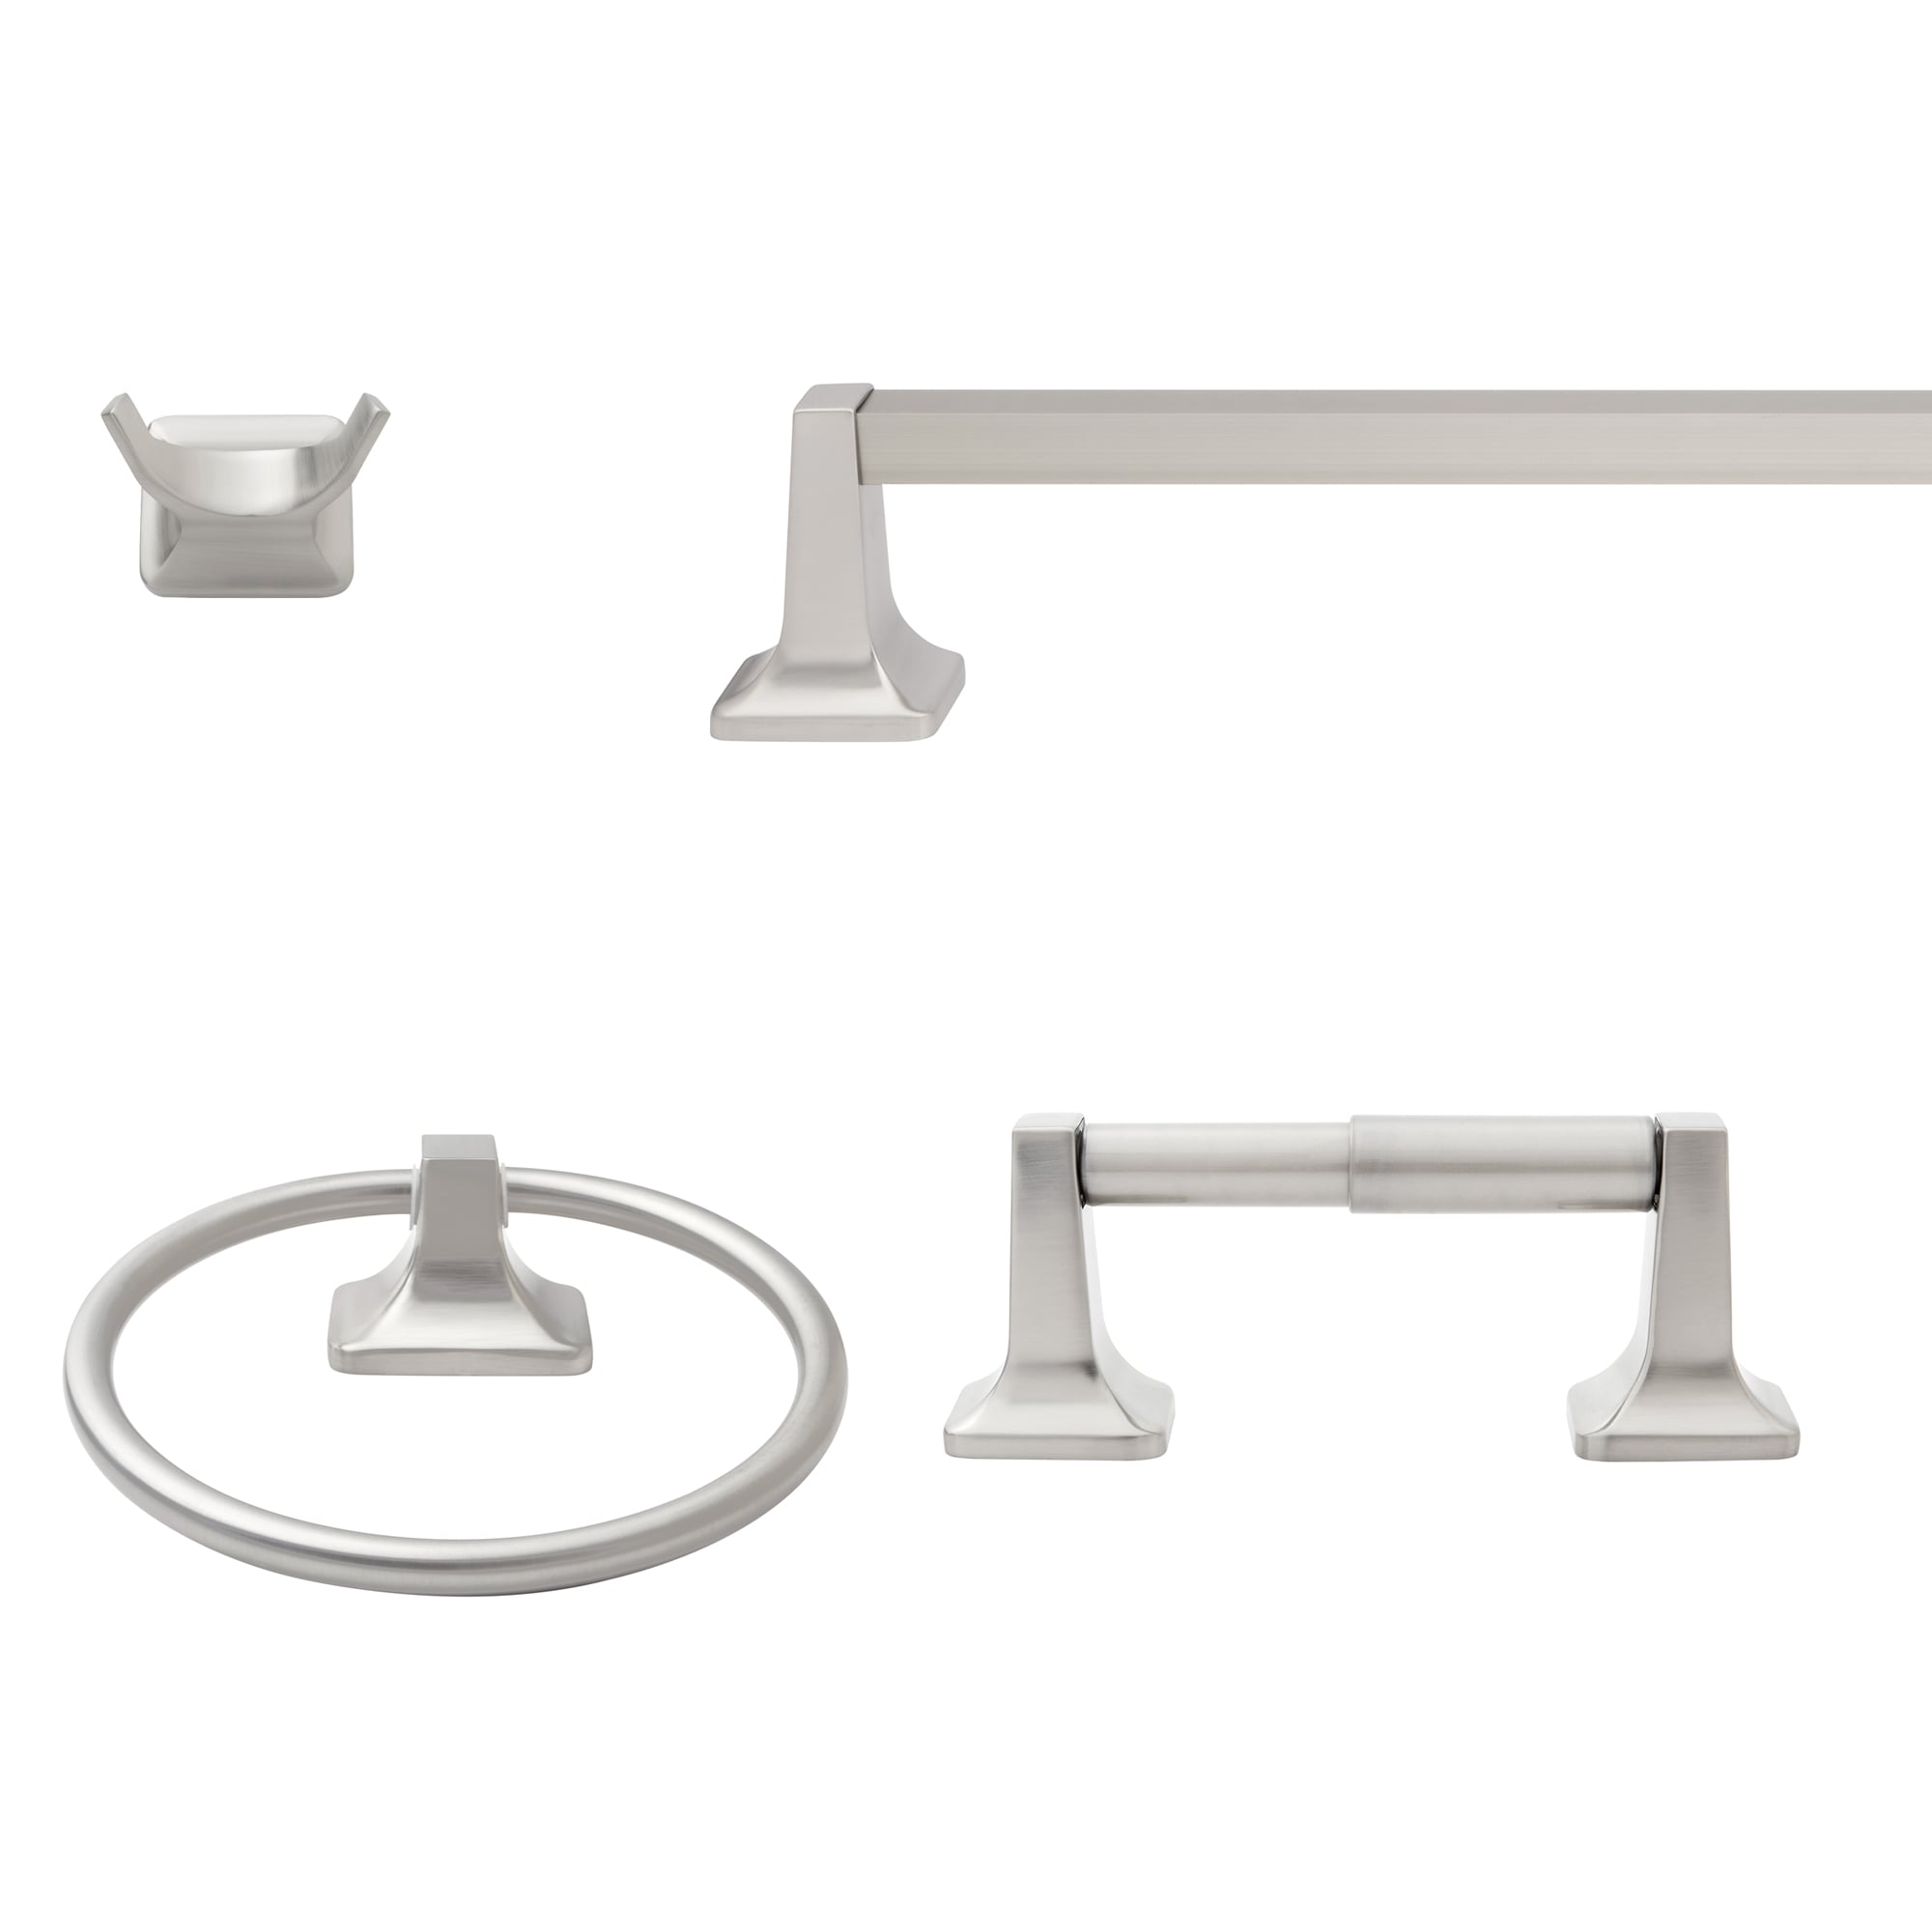 Project Source Seton Chrome Wall Mount Spring-loaded Toilet Paper